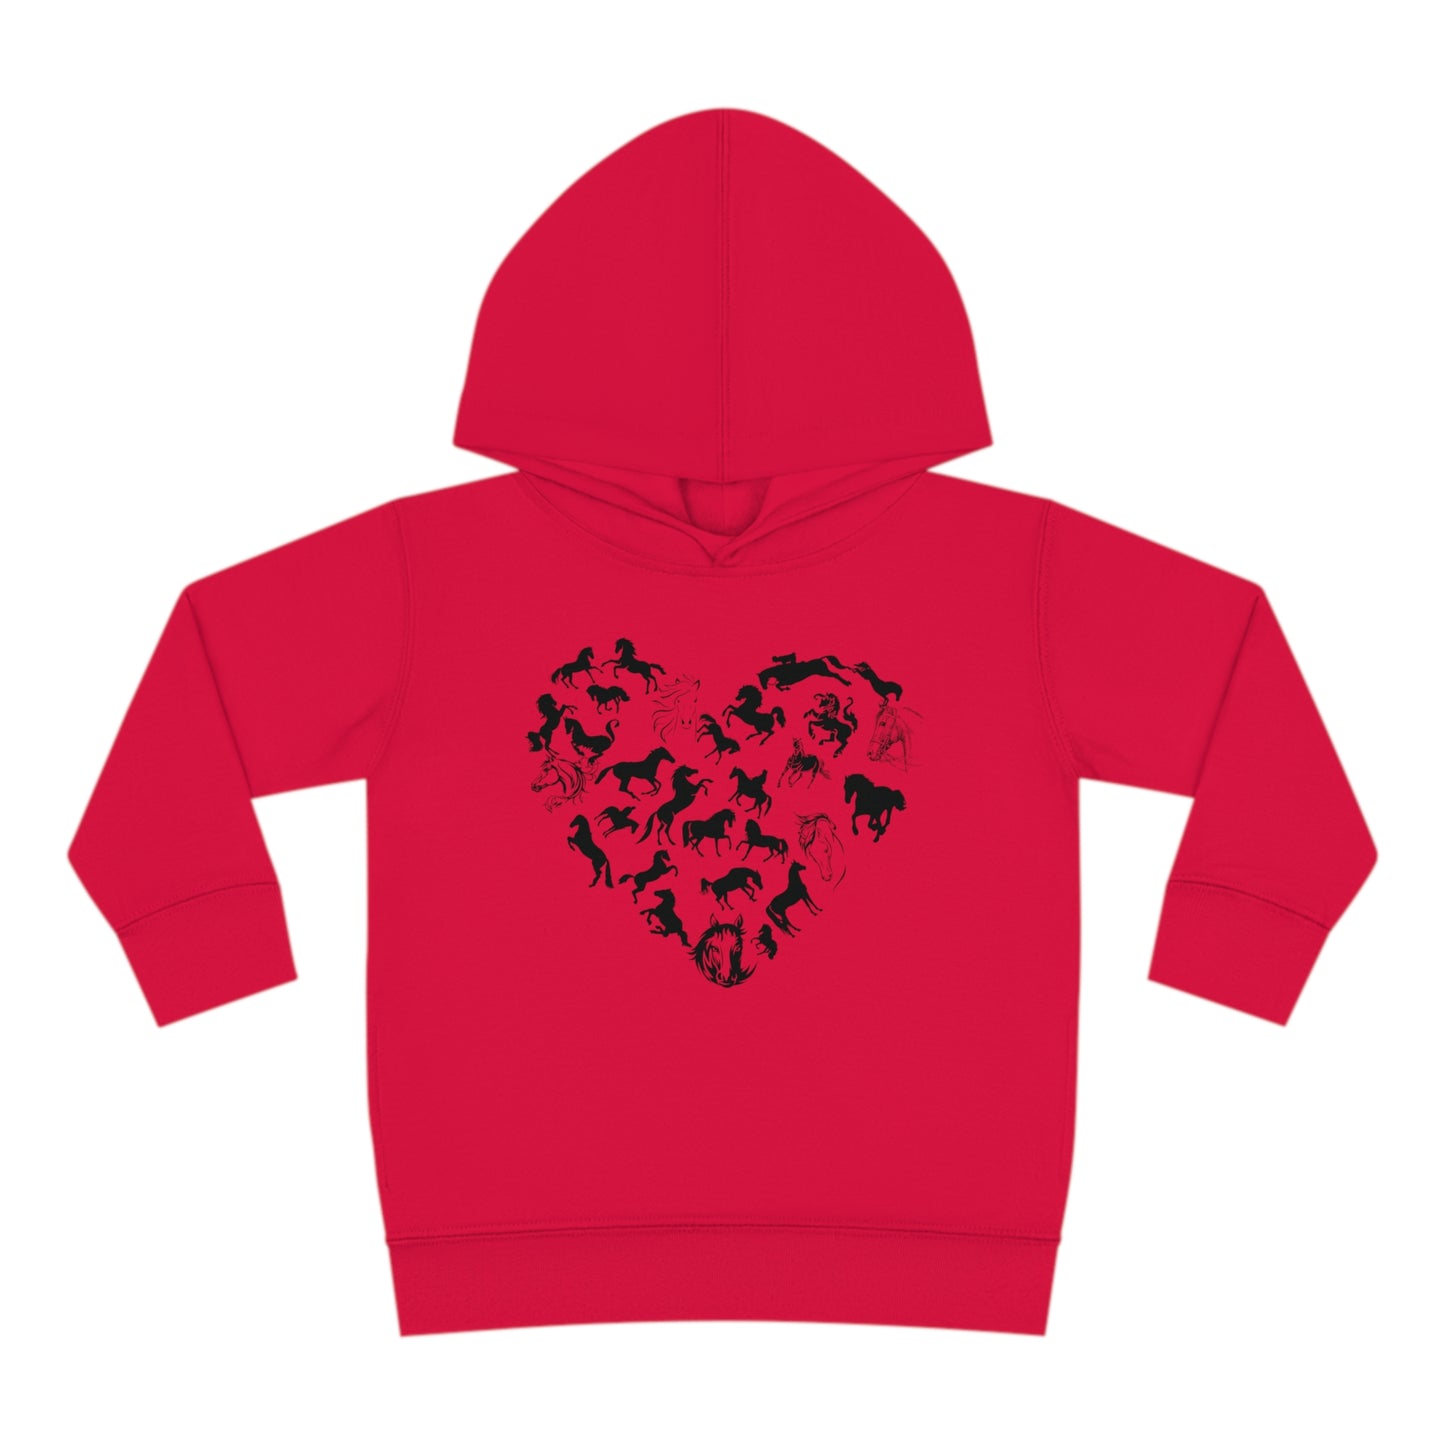 Horse Heart Hoodie | Horse Lover Tee - Horses Heart Toddler - Horse Lover Gift - Horse Toddler Shirt - Equestrian Tee - Gift for Horse Owner Kids clothes Red 2T 